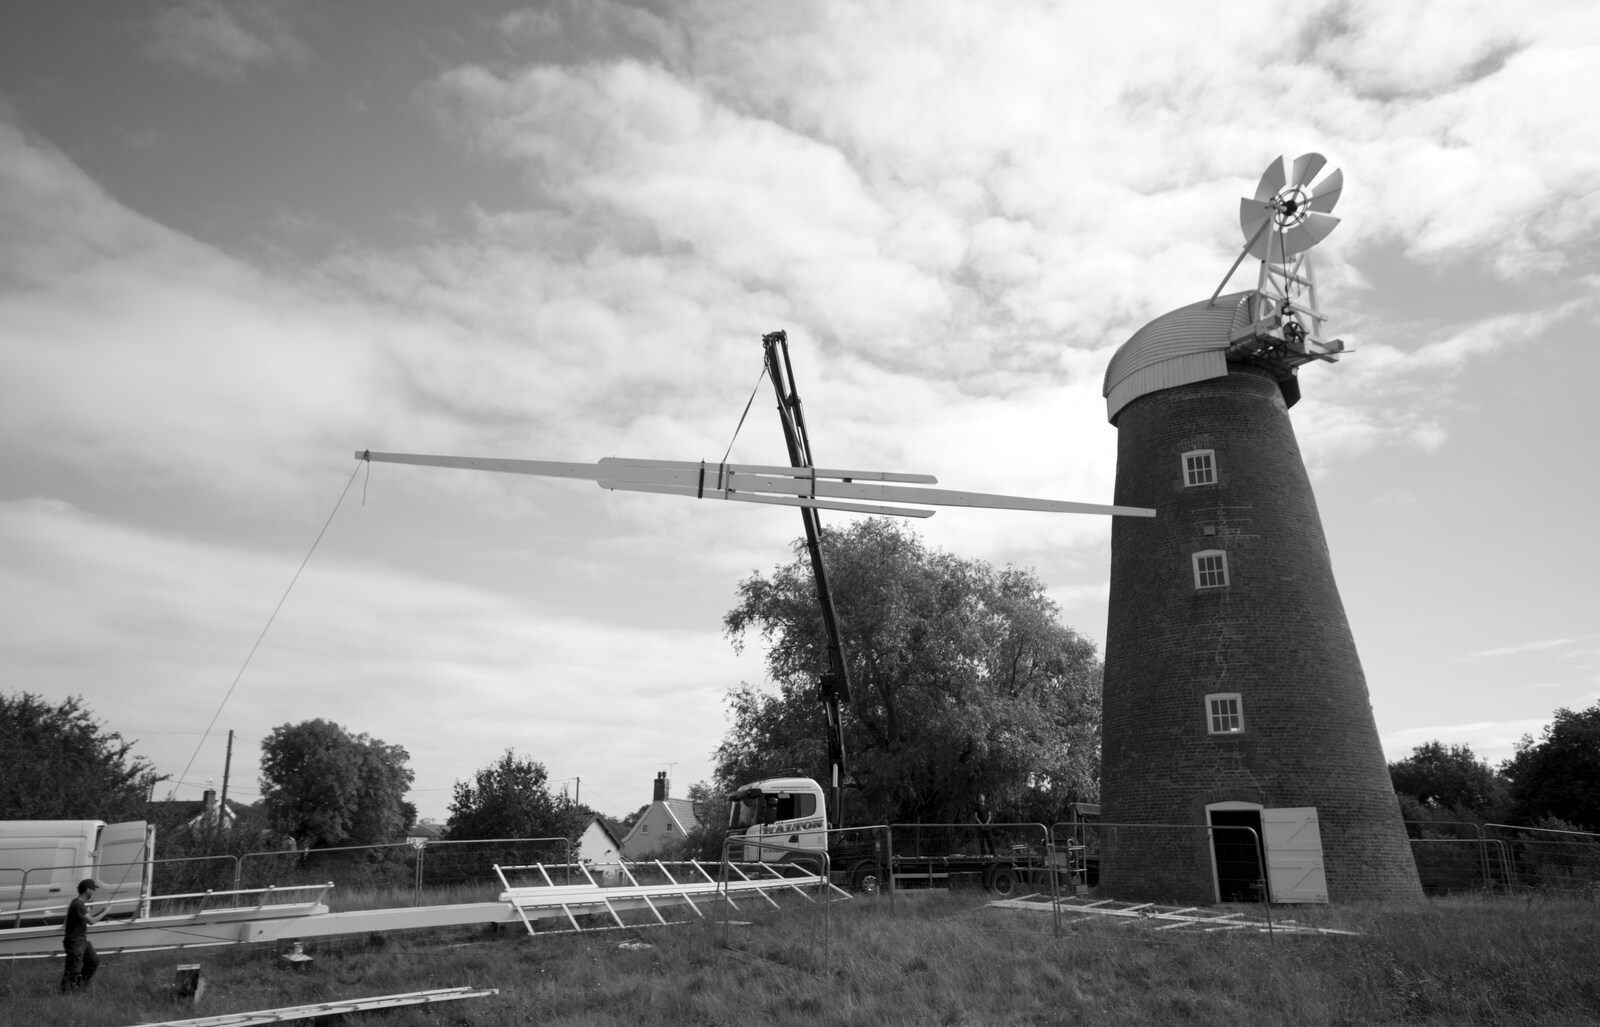 The sail arm is in the air from A Sail Fitting, Billingford Windmill, Billingford, Norfolk - 20th August 2020